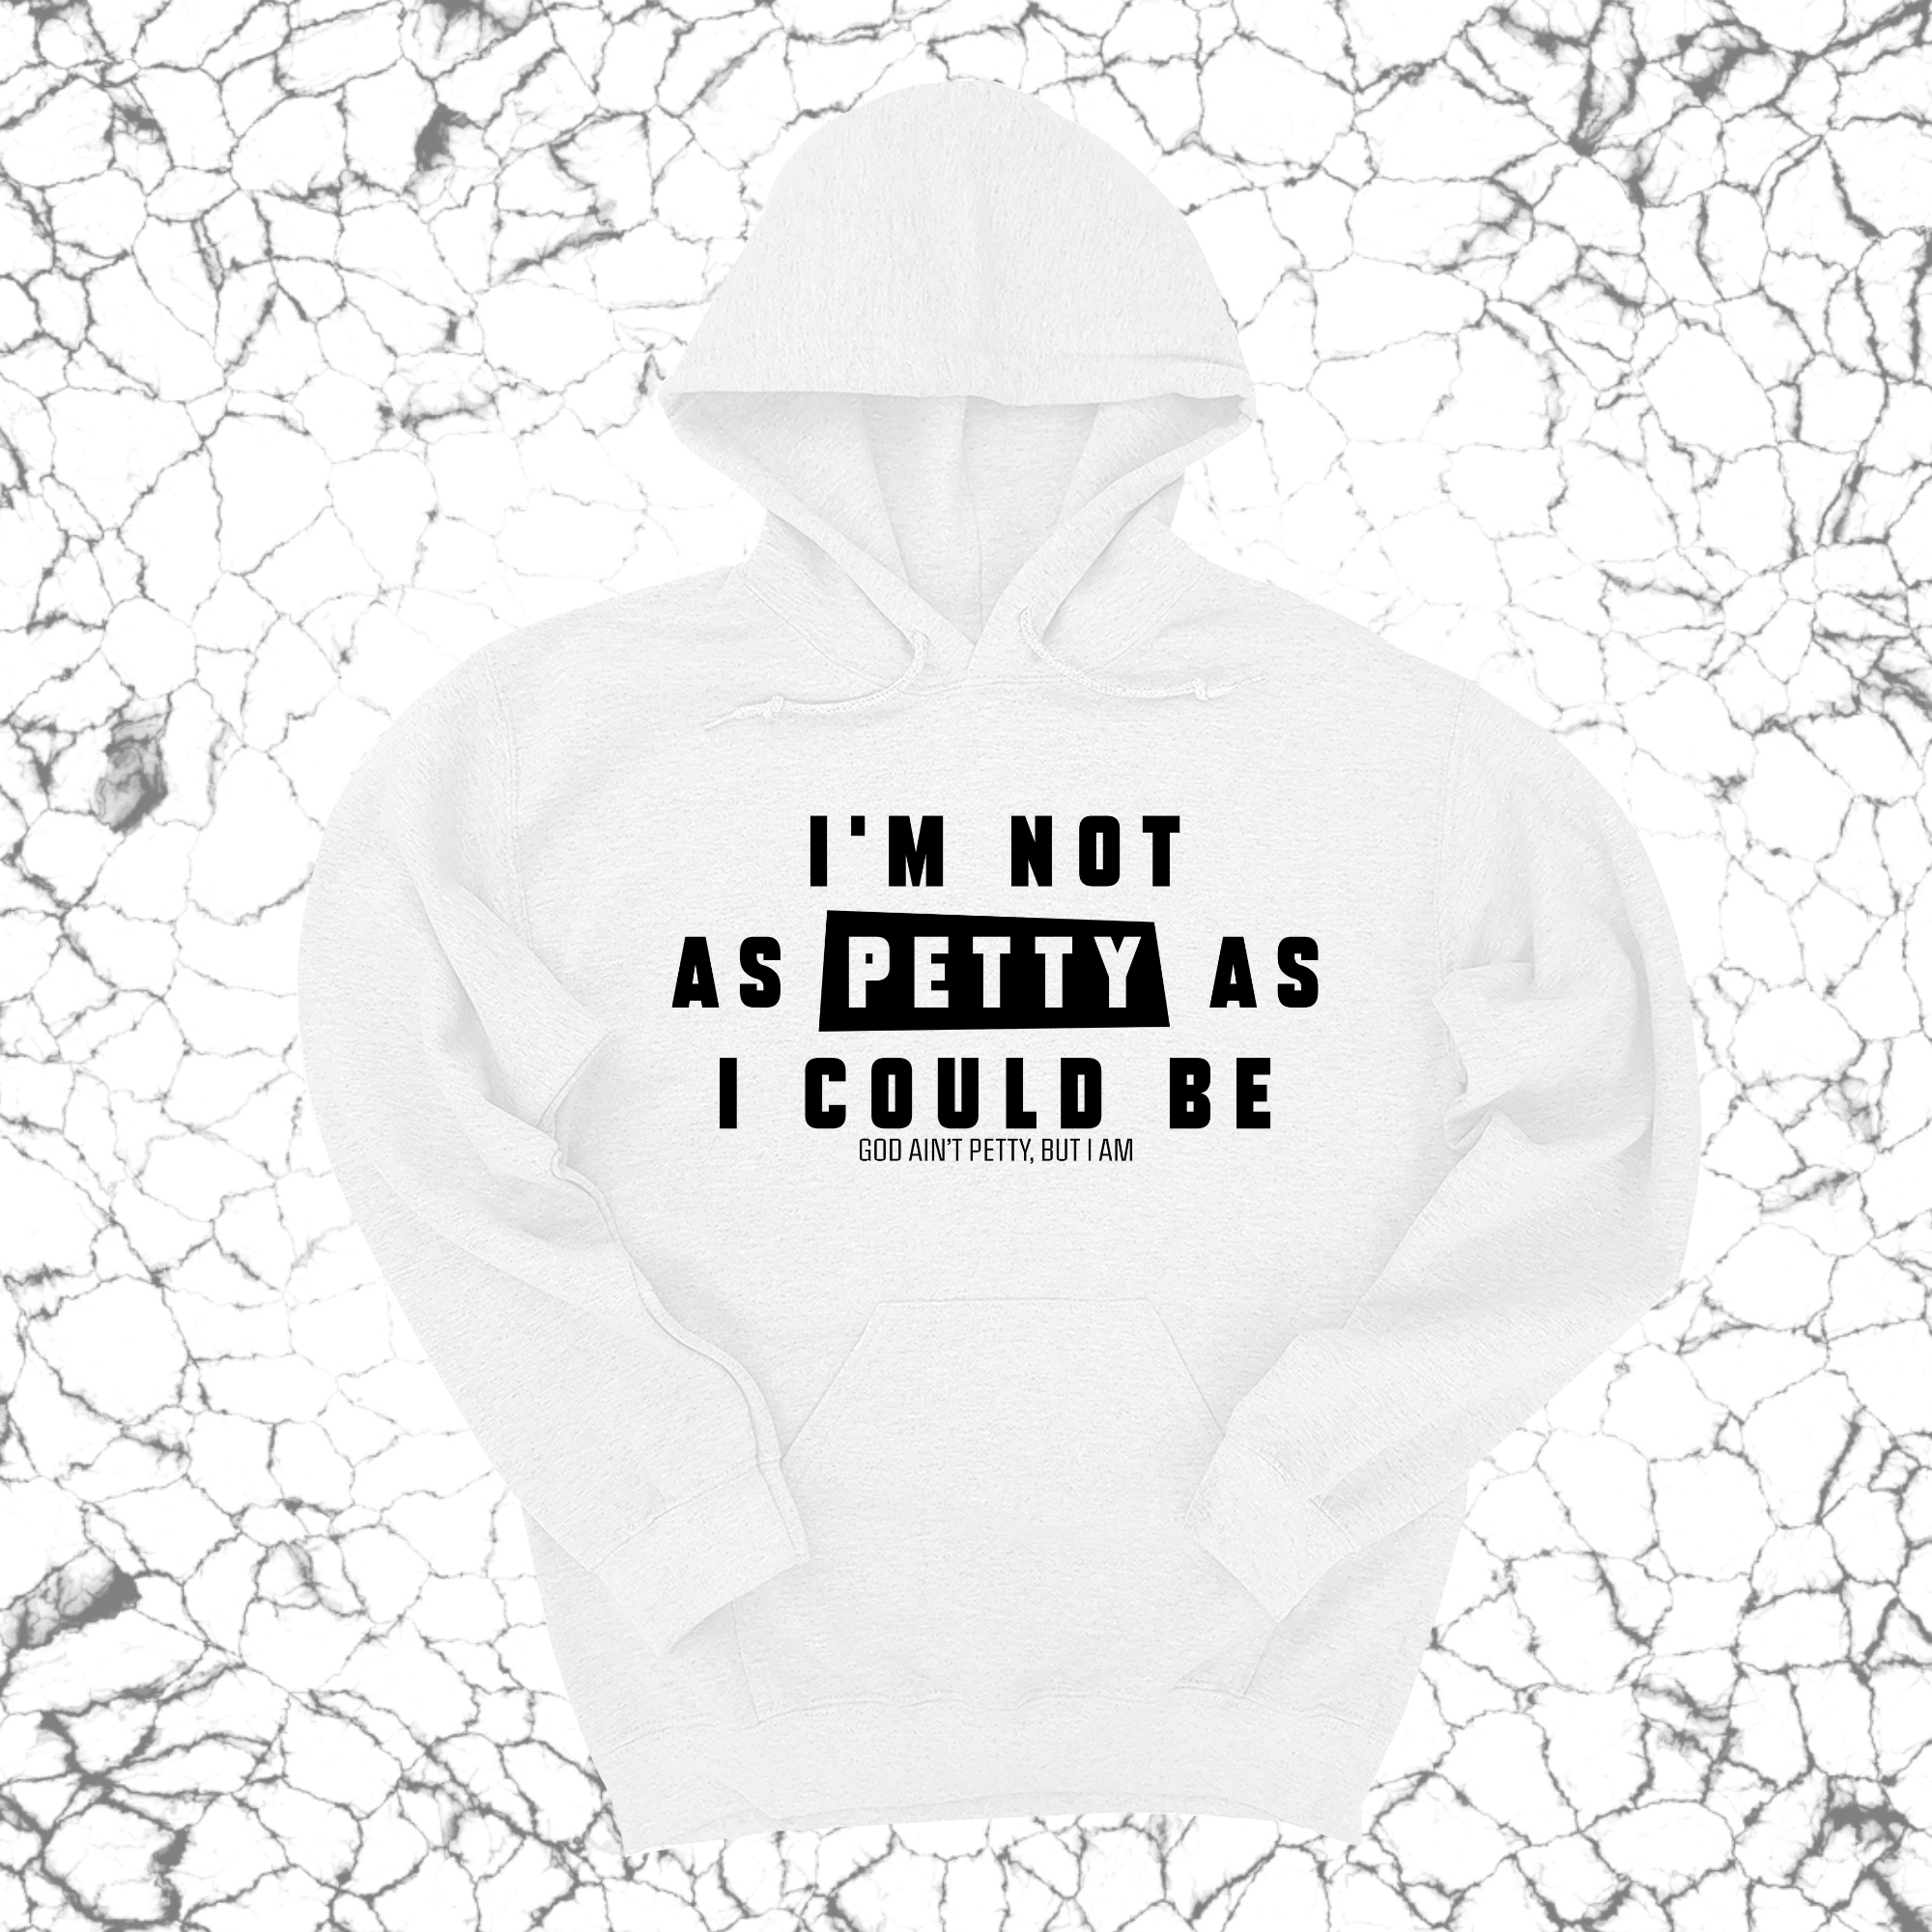 I'm not as petty as I could be Unisex Hoodie-Hoodie-The Original God Ain't Petty But I Am